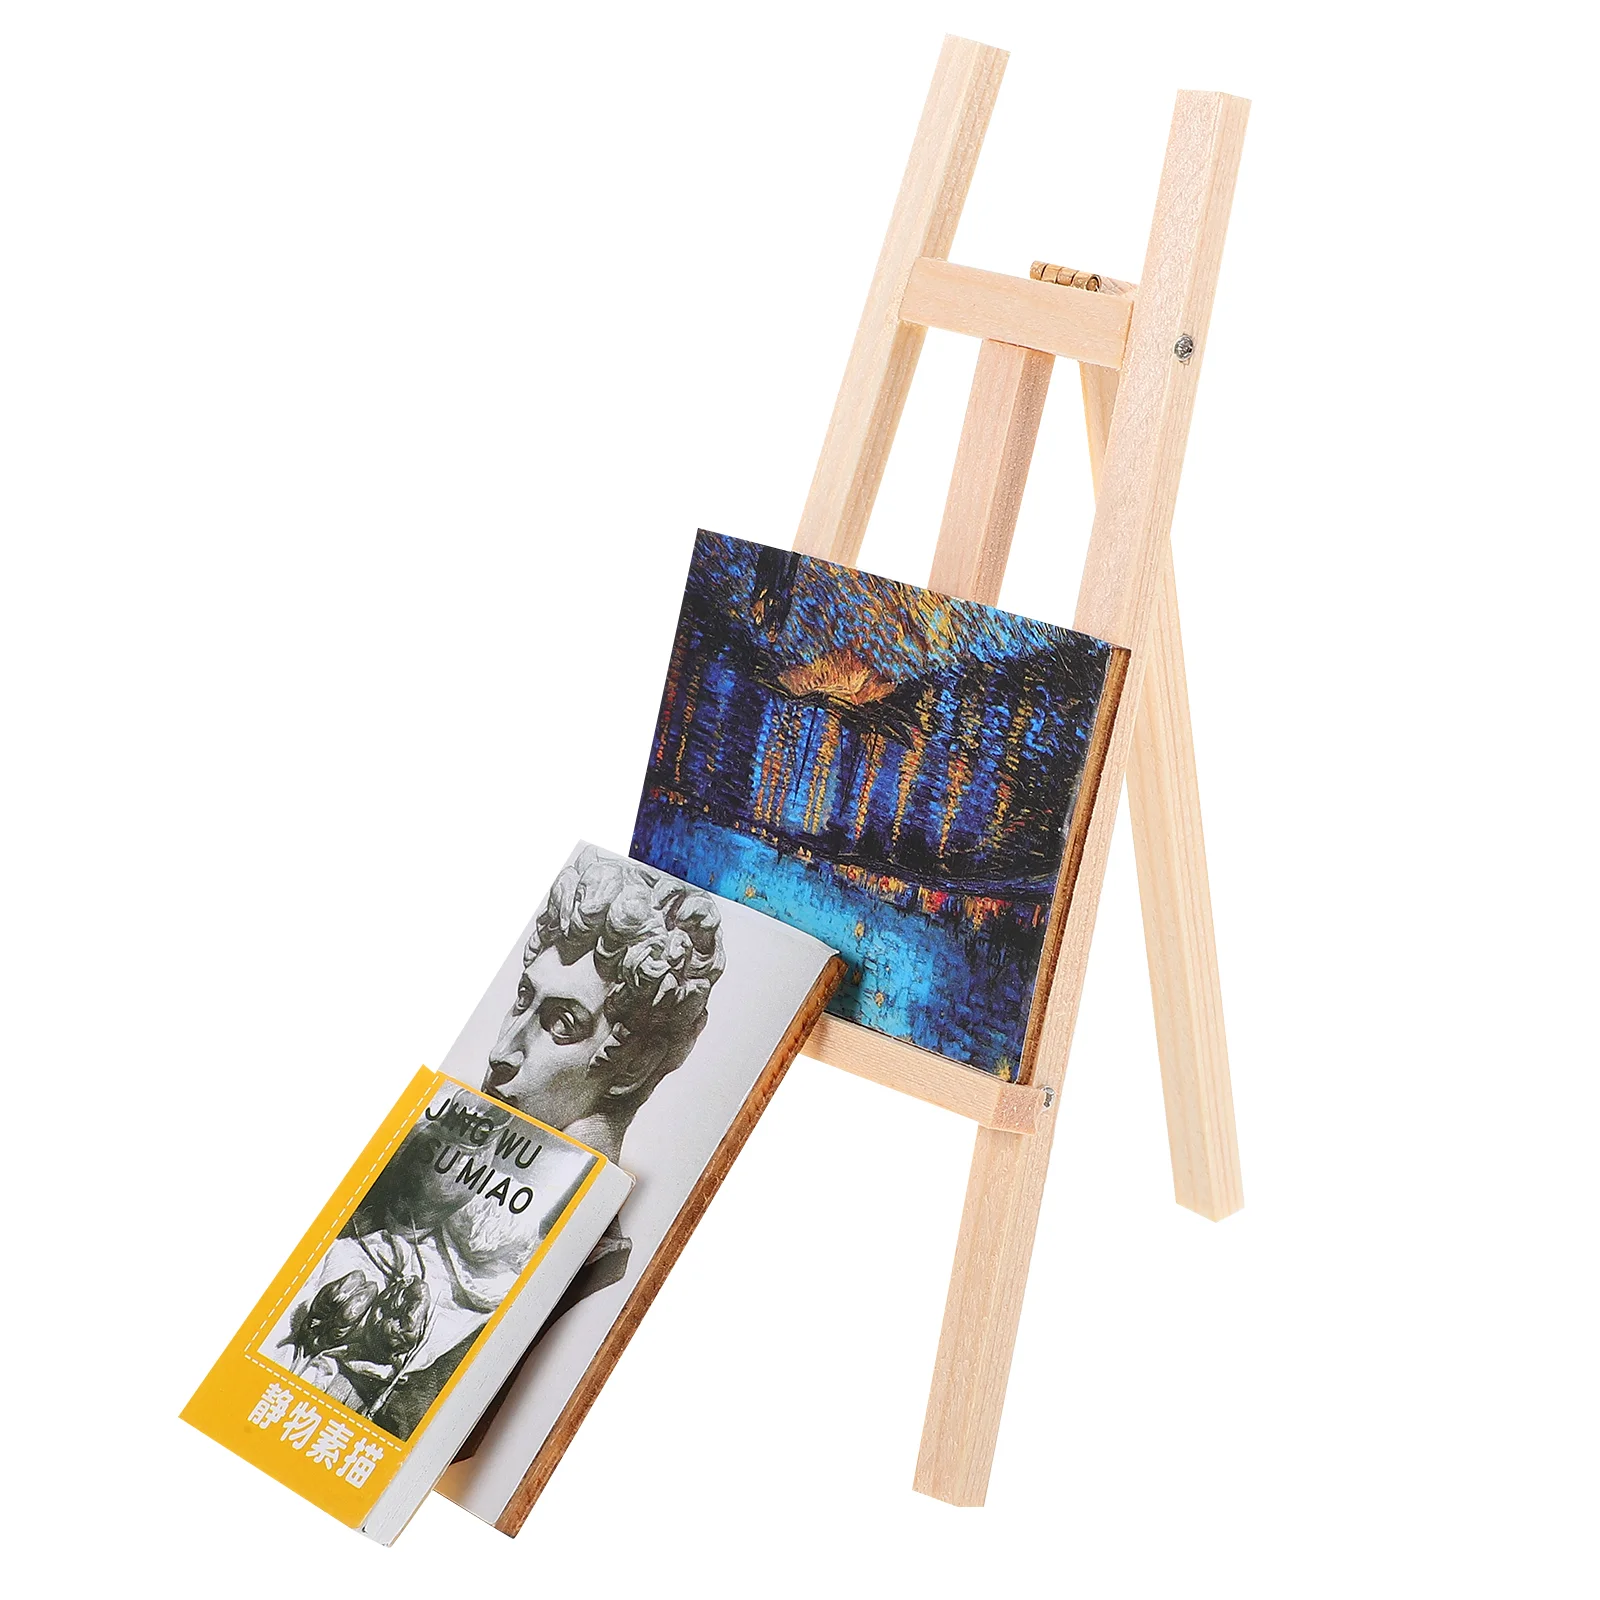 House Decorative Painting Mini Adornment Miniature Easel Wooden Board Furniture Small Model custom custom printing 365 days affirmations inspirational quote daily motivation mini perpetual desk easel calendar